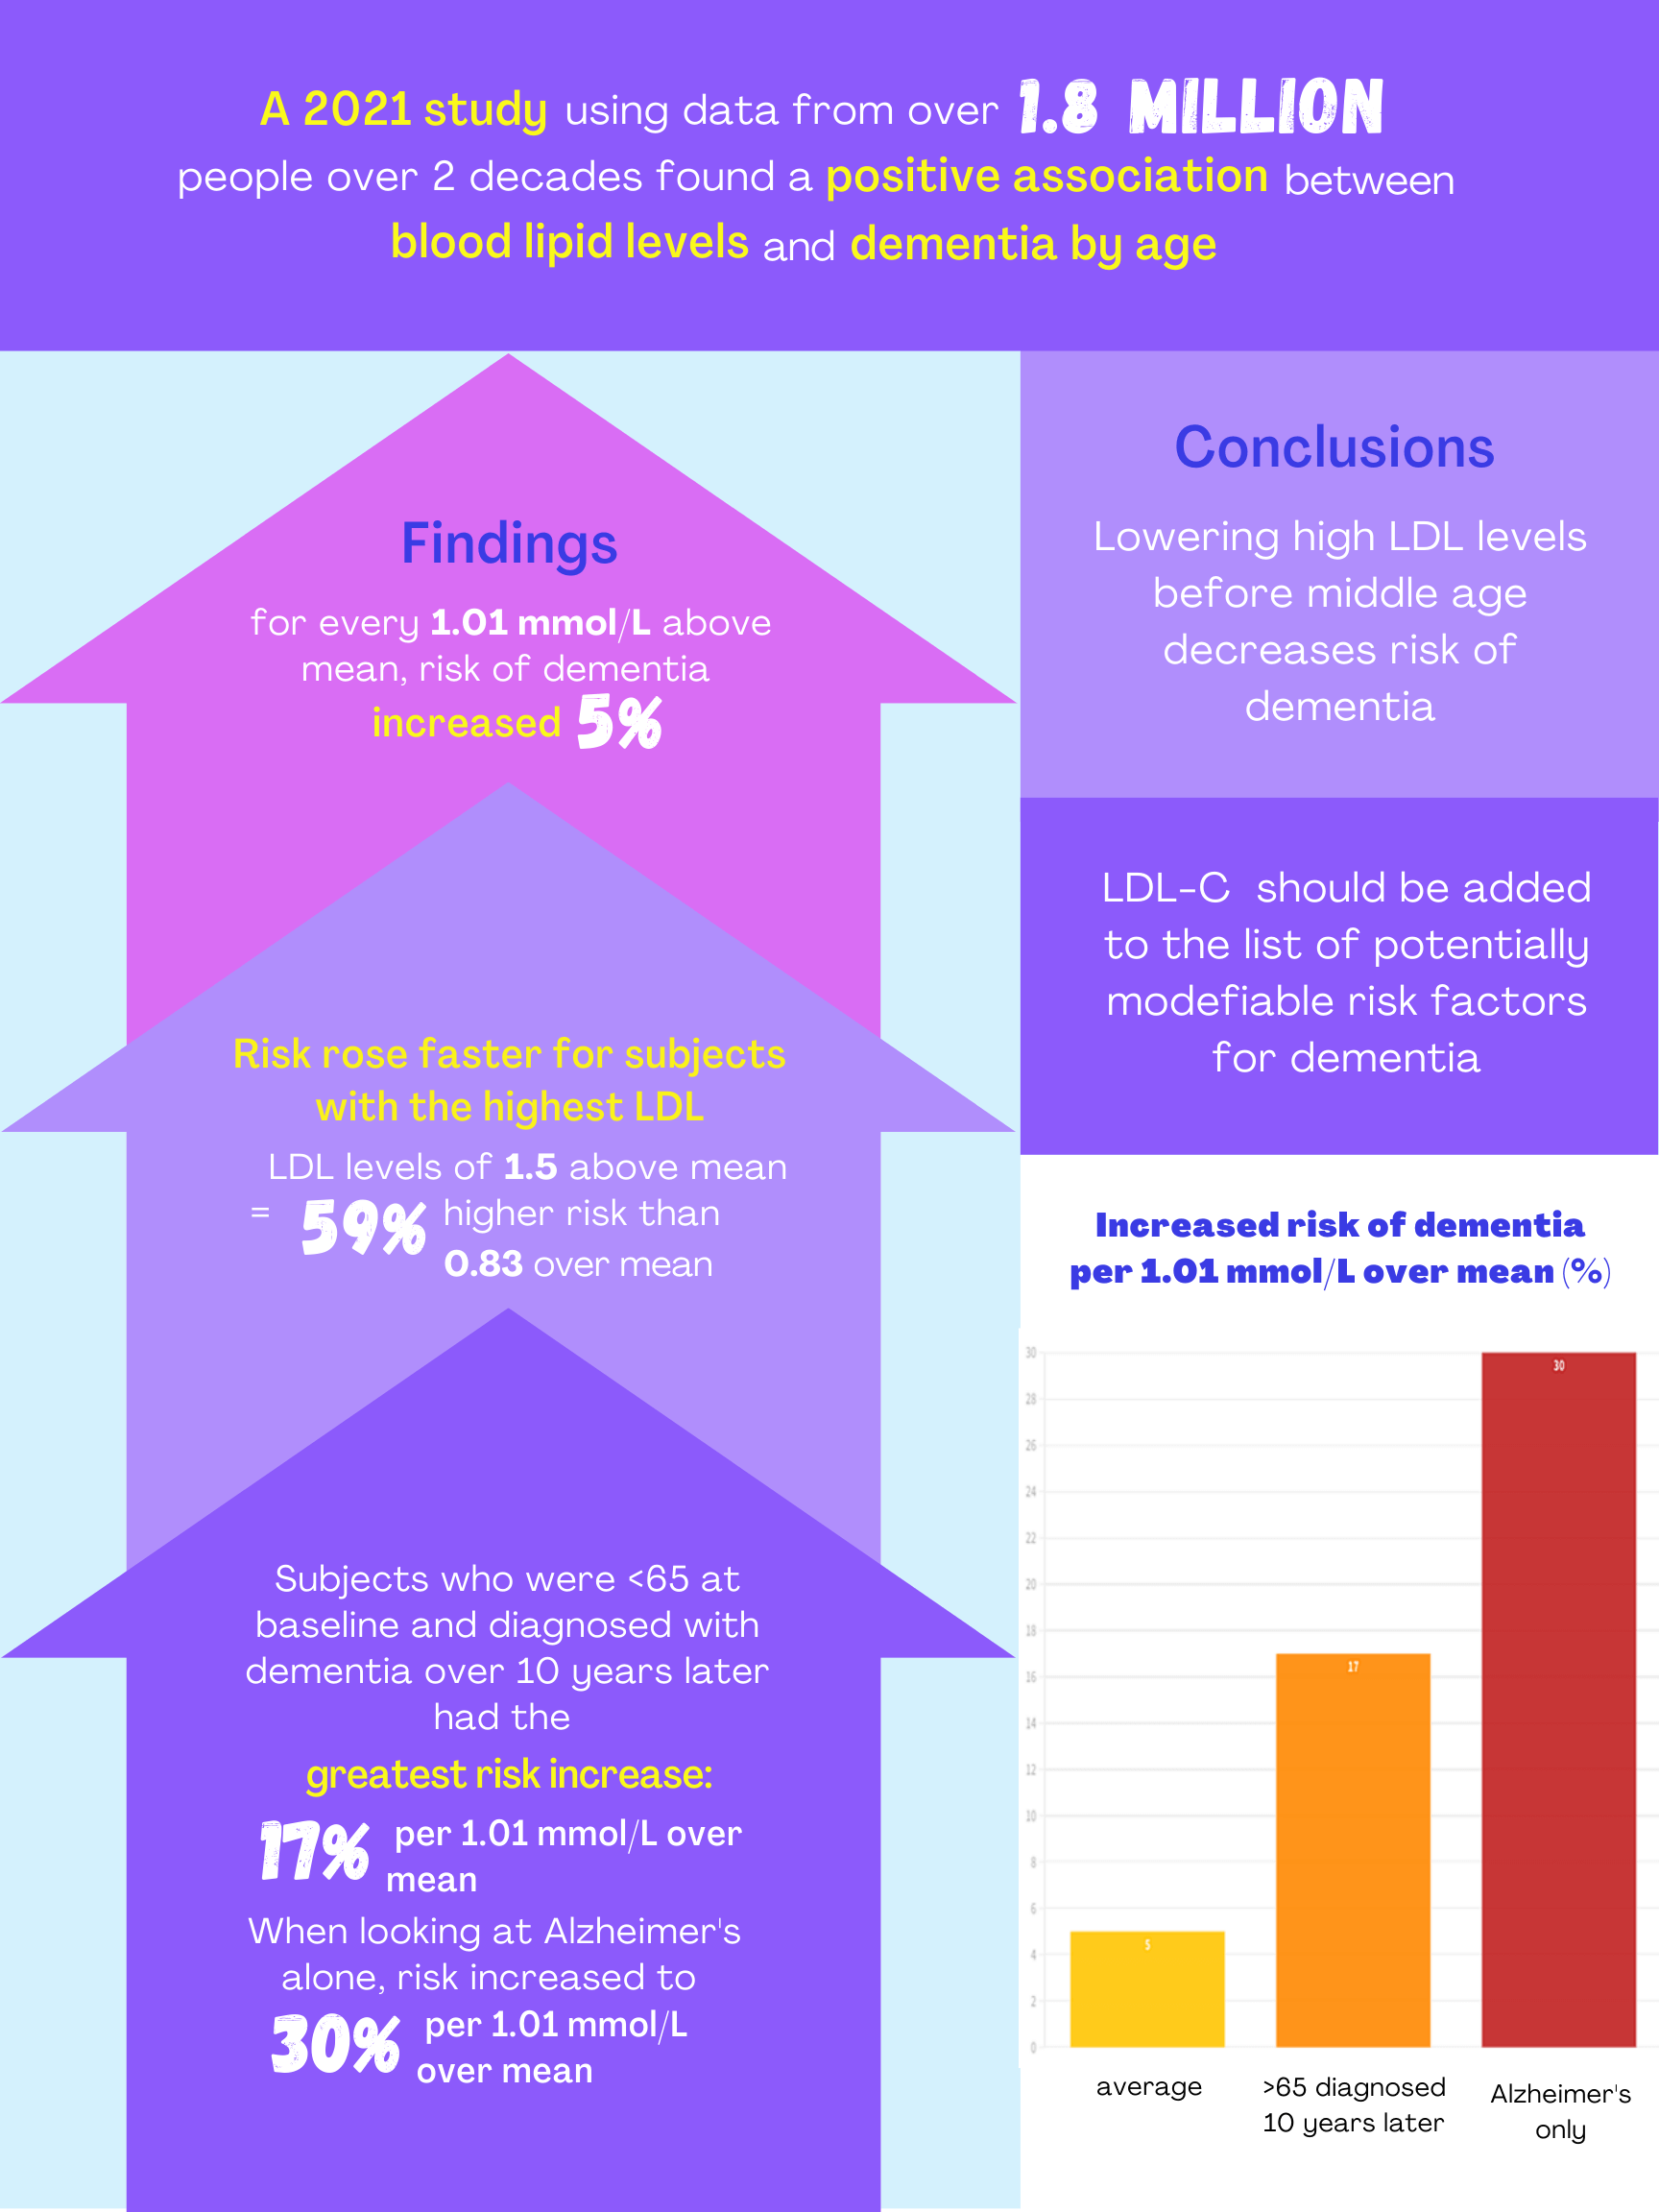 Infographic page 2 summarizing the impact of cholestorol on the risk of dementia showing an increase risk of up to 59%